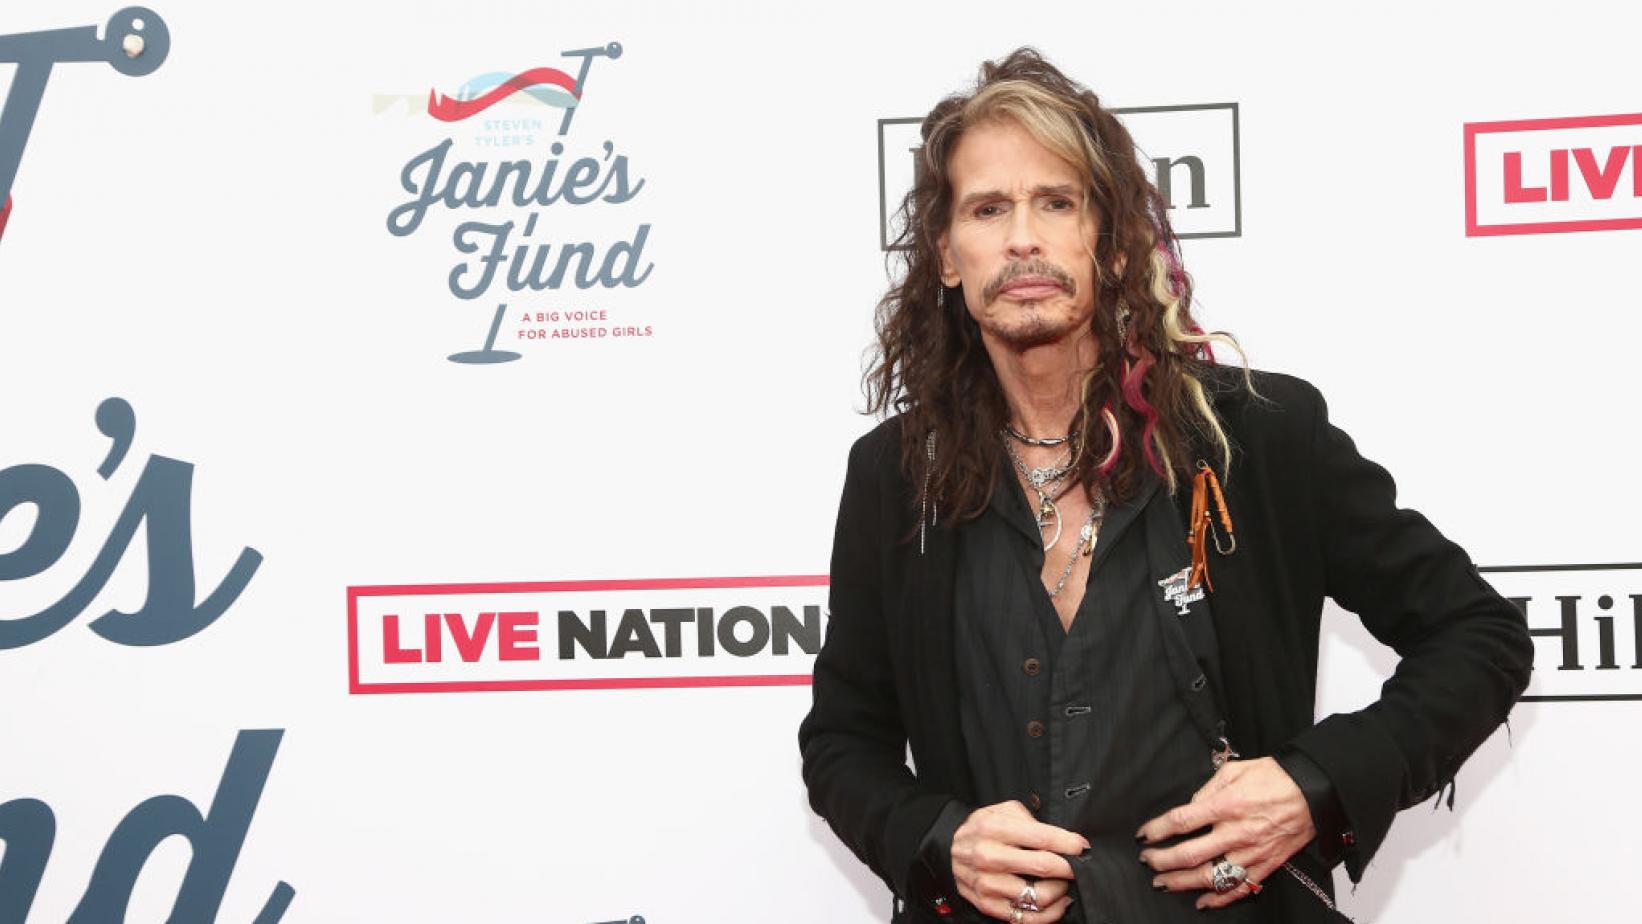 Steven Tyler's Grammy Awards Viewing Party